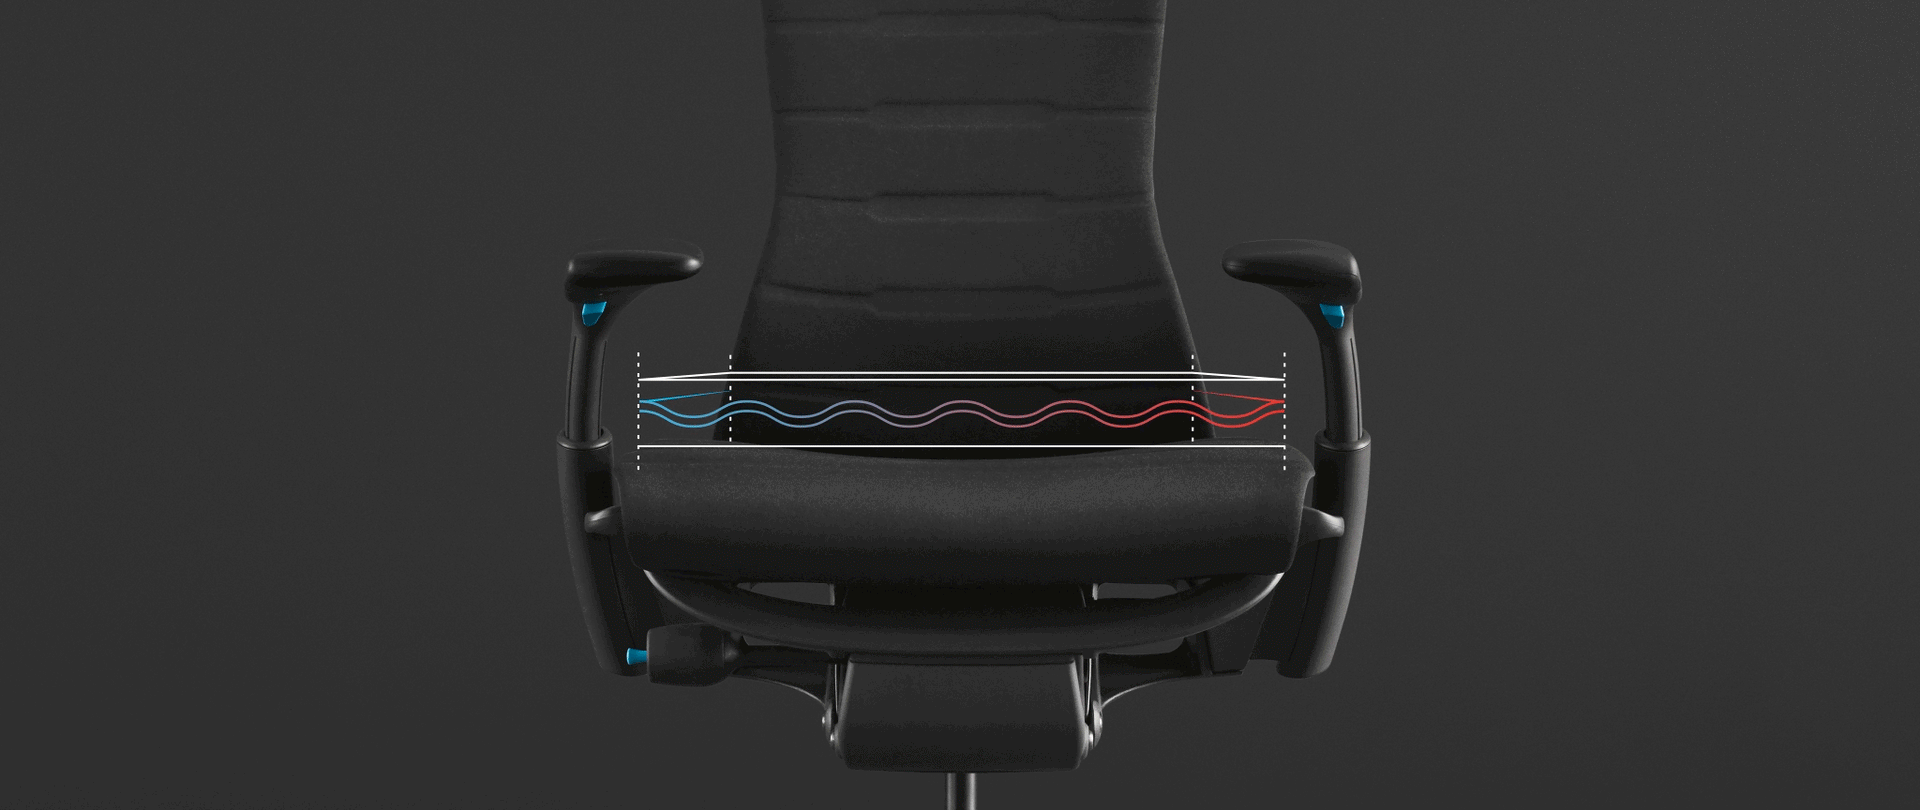 An animation highlighting the new cooling foam in the Embody Gaming Chair’s seat, overlaid on a photo of the chair on a black background.